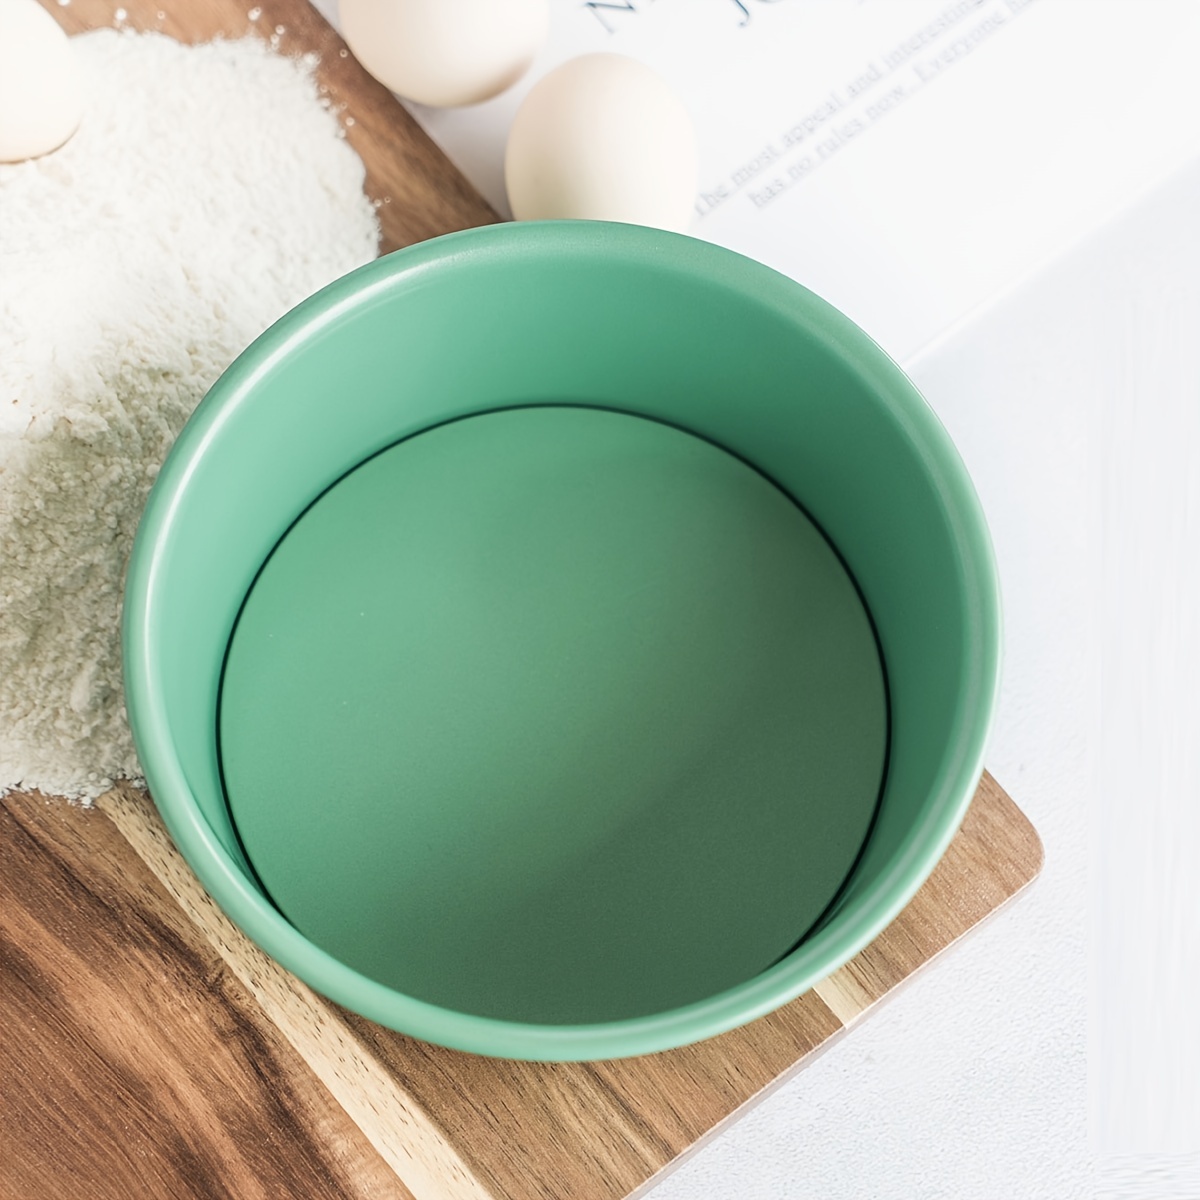 Buy Silicone Round Cake Pan from Cook'n'Chic®